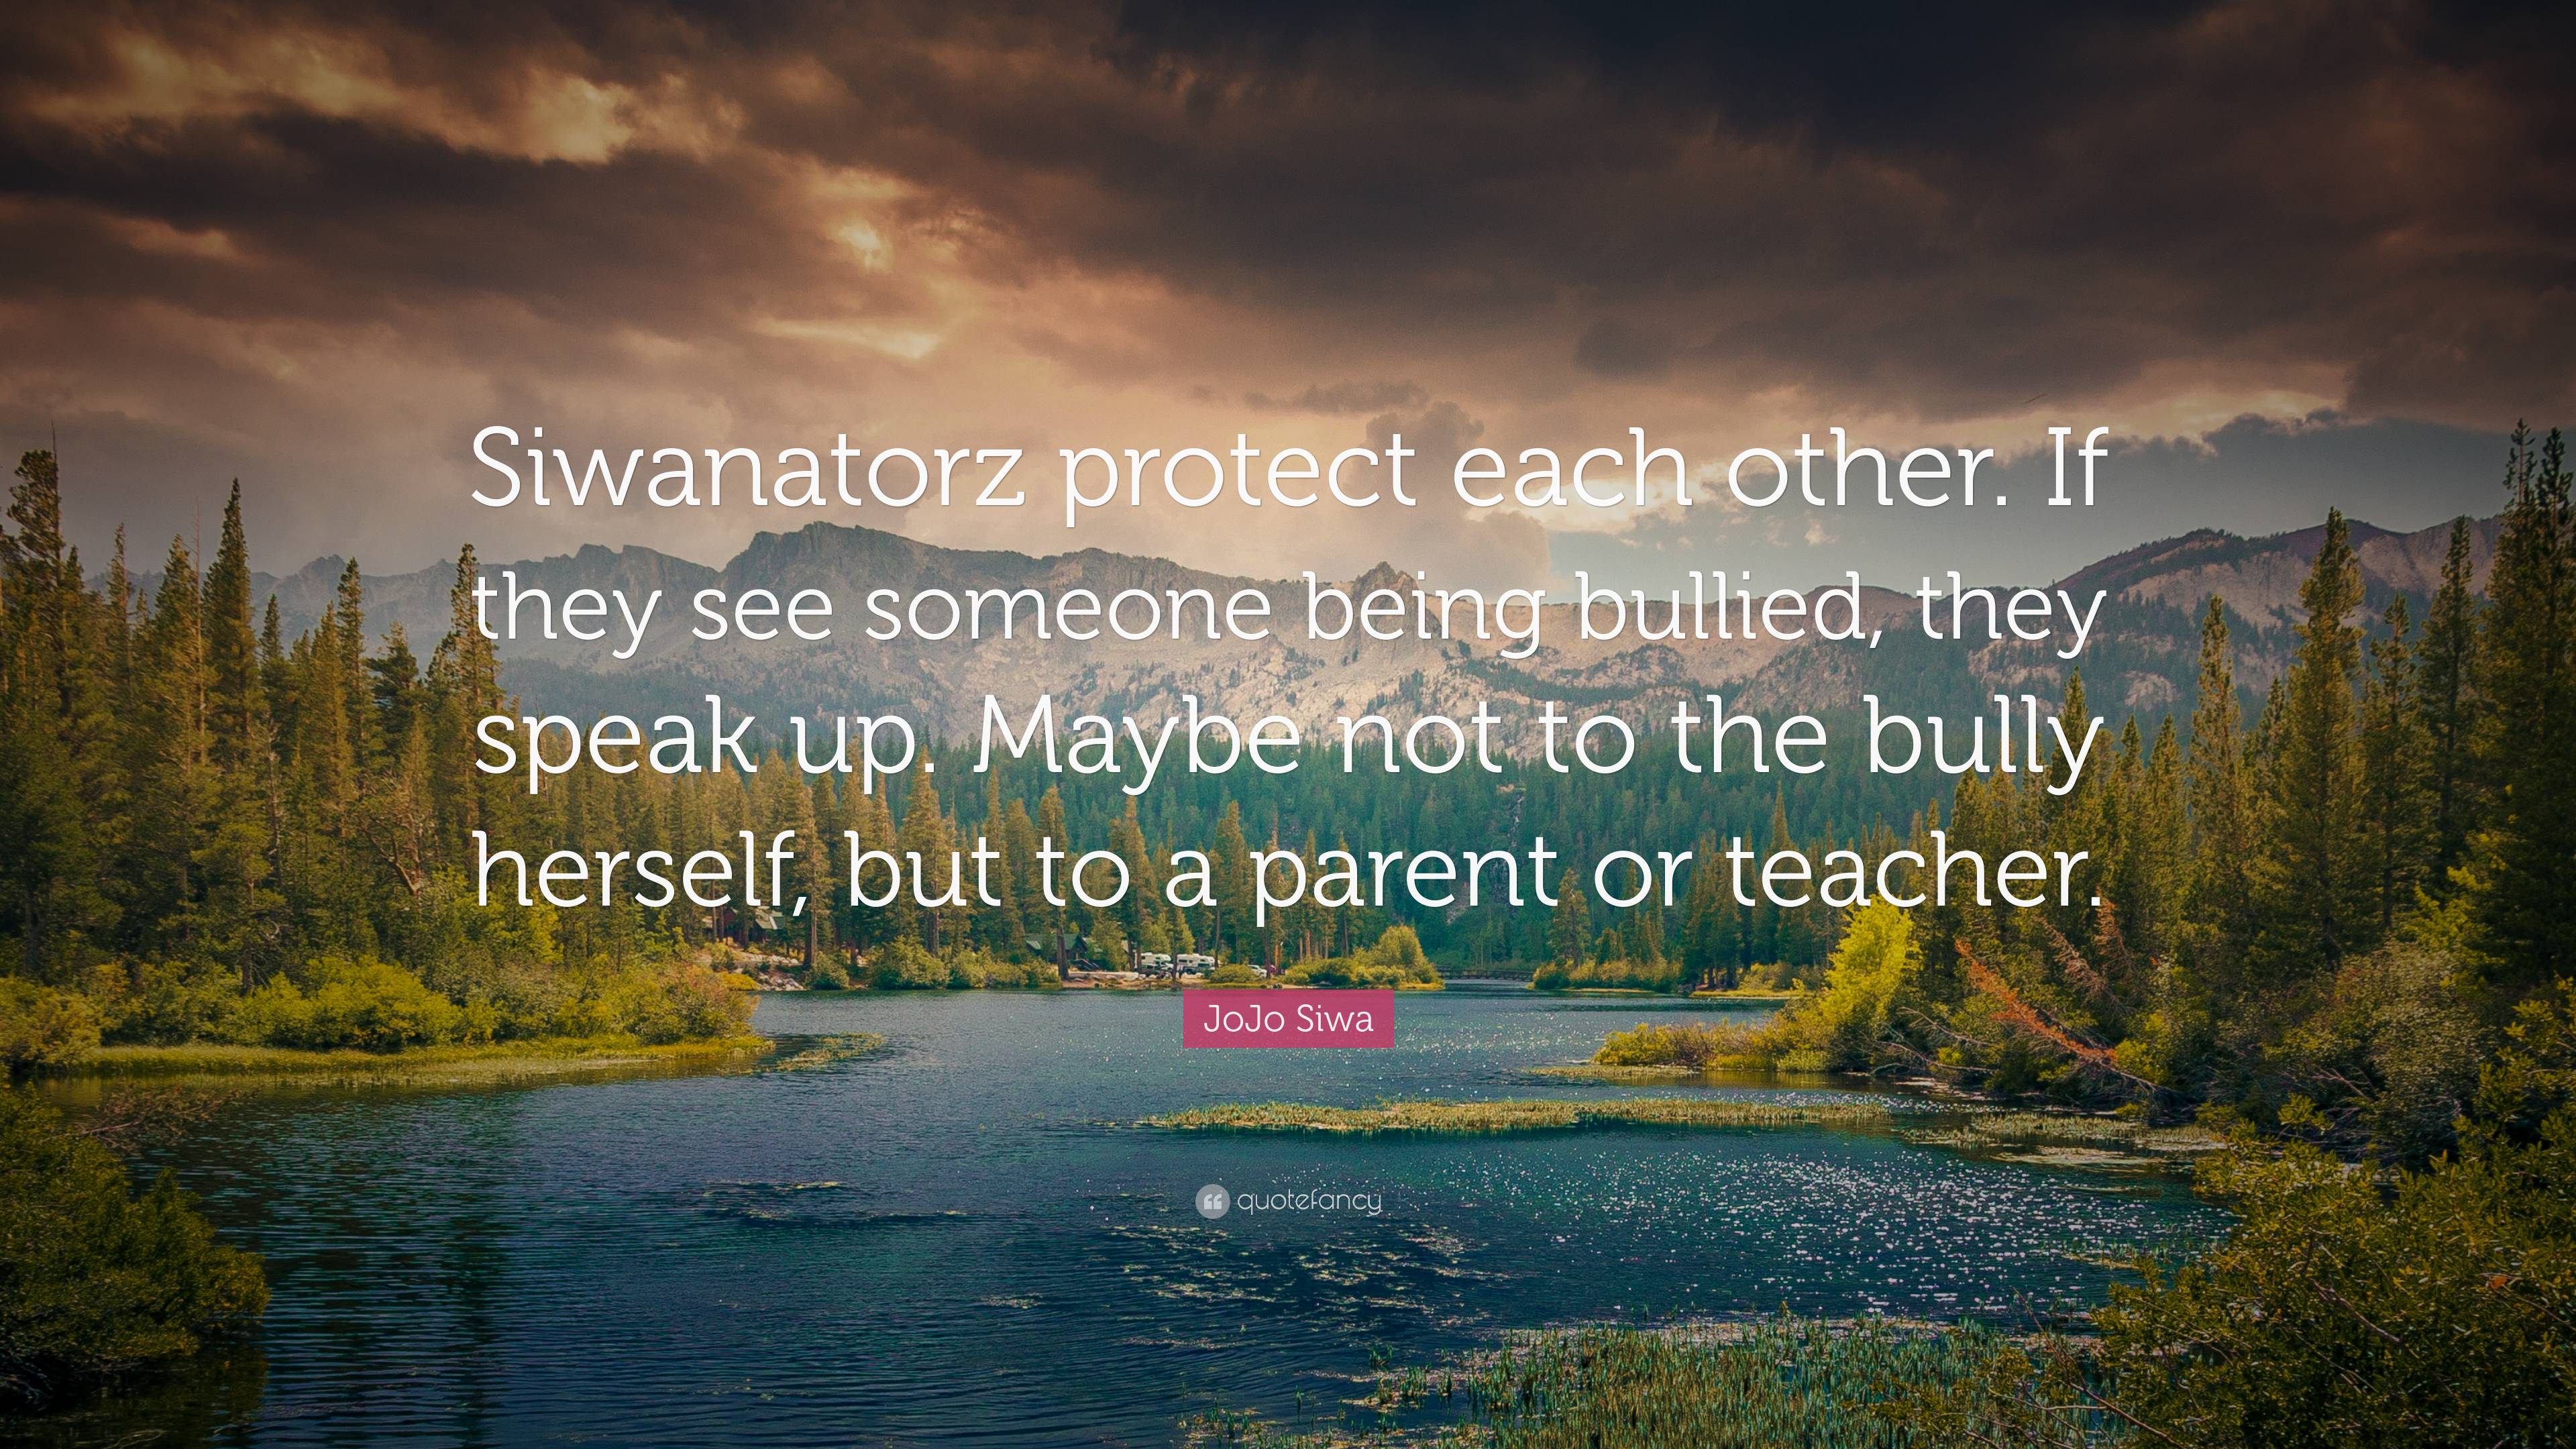 JoJo Siwa Quote: “Siwanatorz protect each other. If they see someone ...